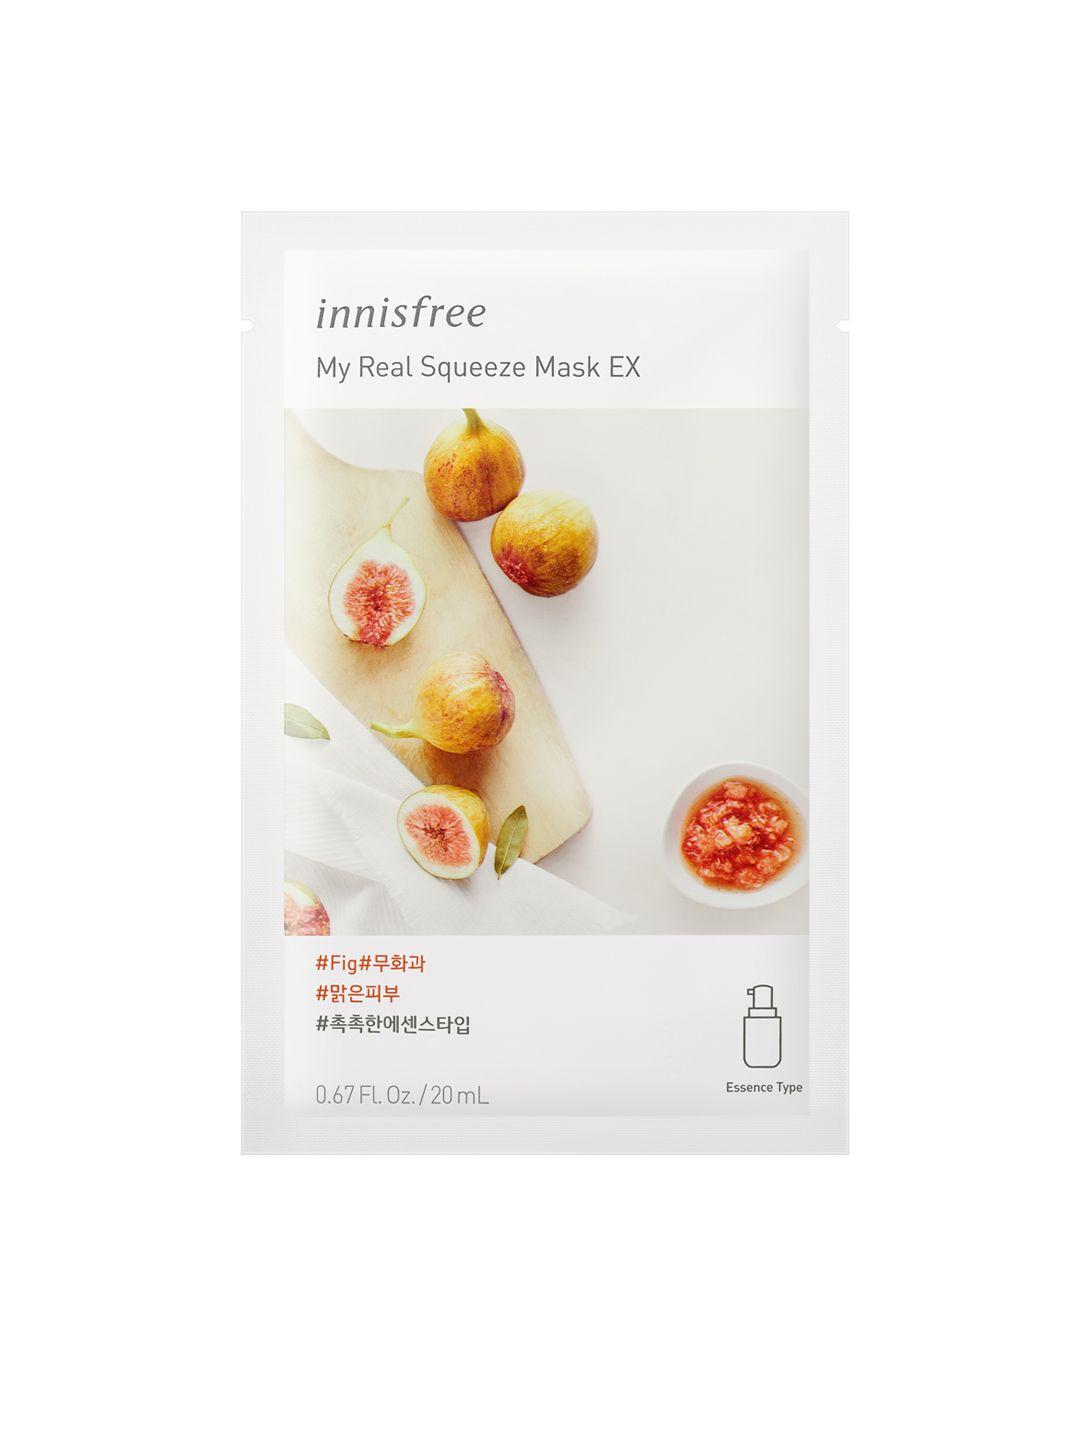 innisfree unisex my real squeeze fig mask ex